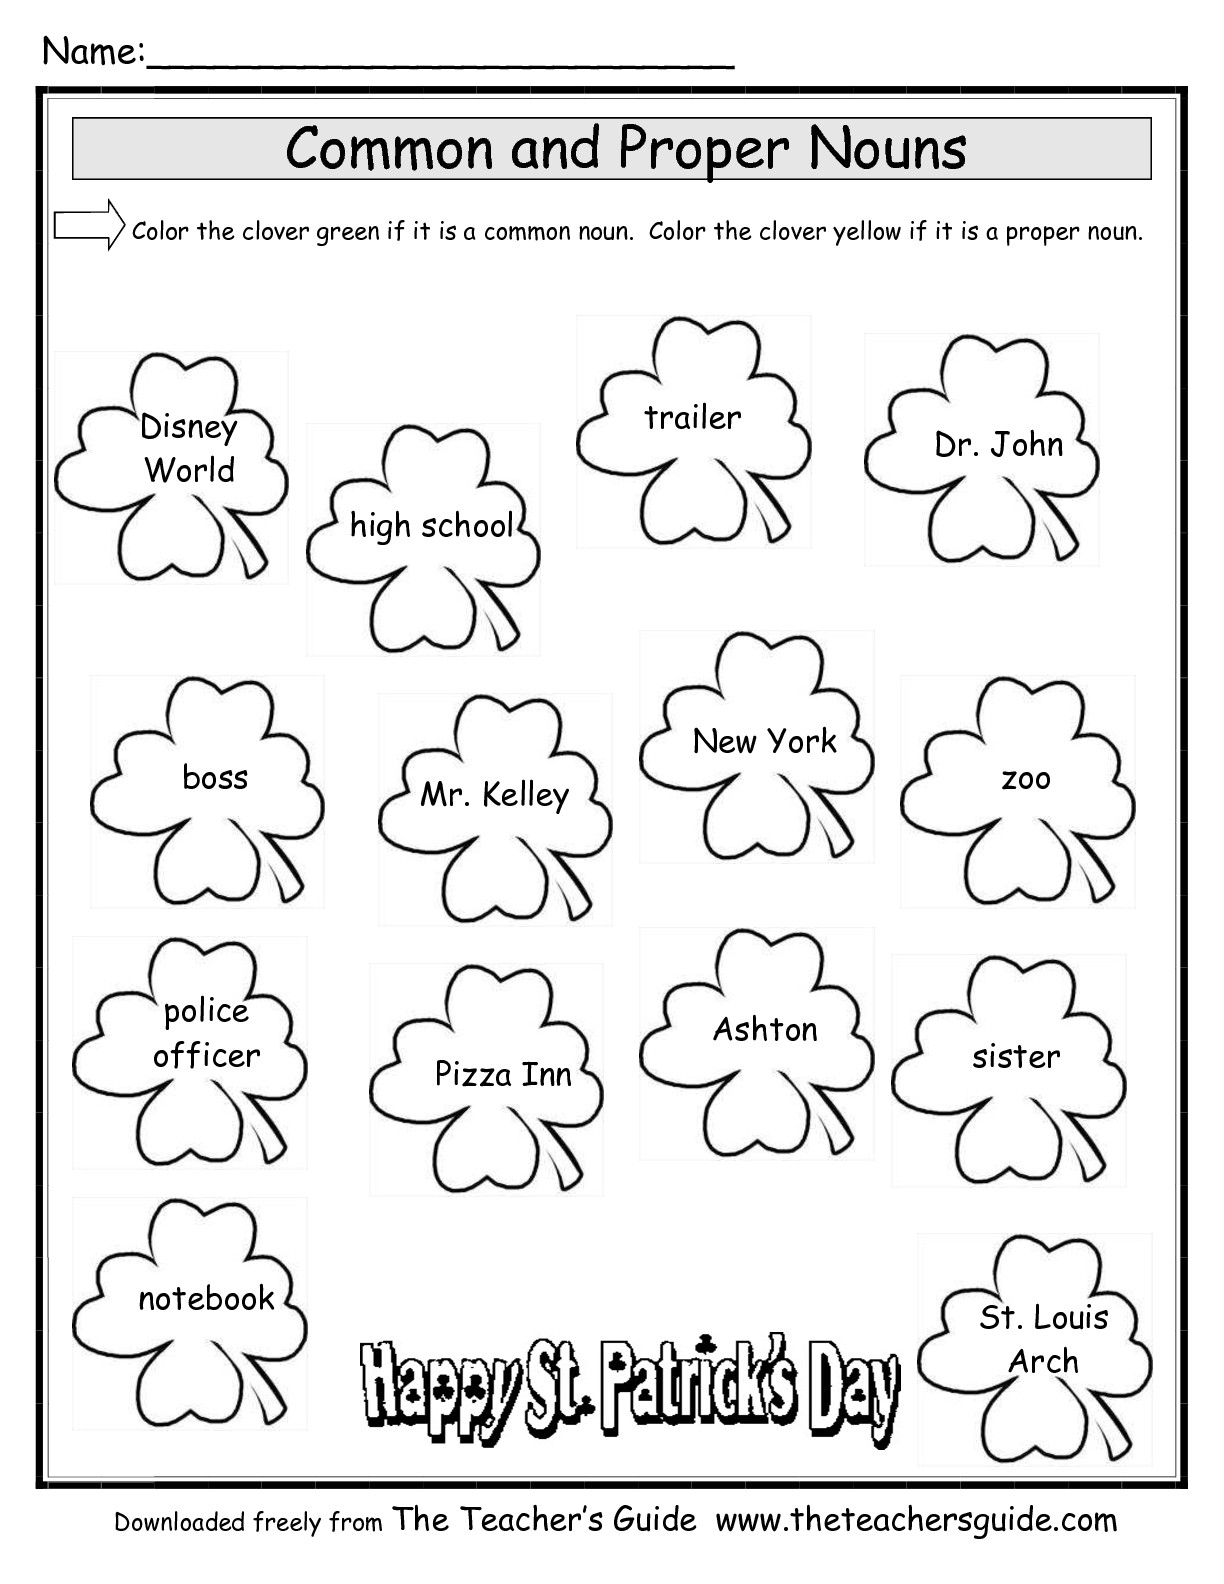 14-best-images-of-nouns-coloring-worksheets-printable-common-proper